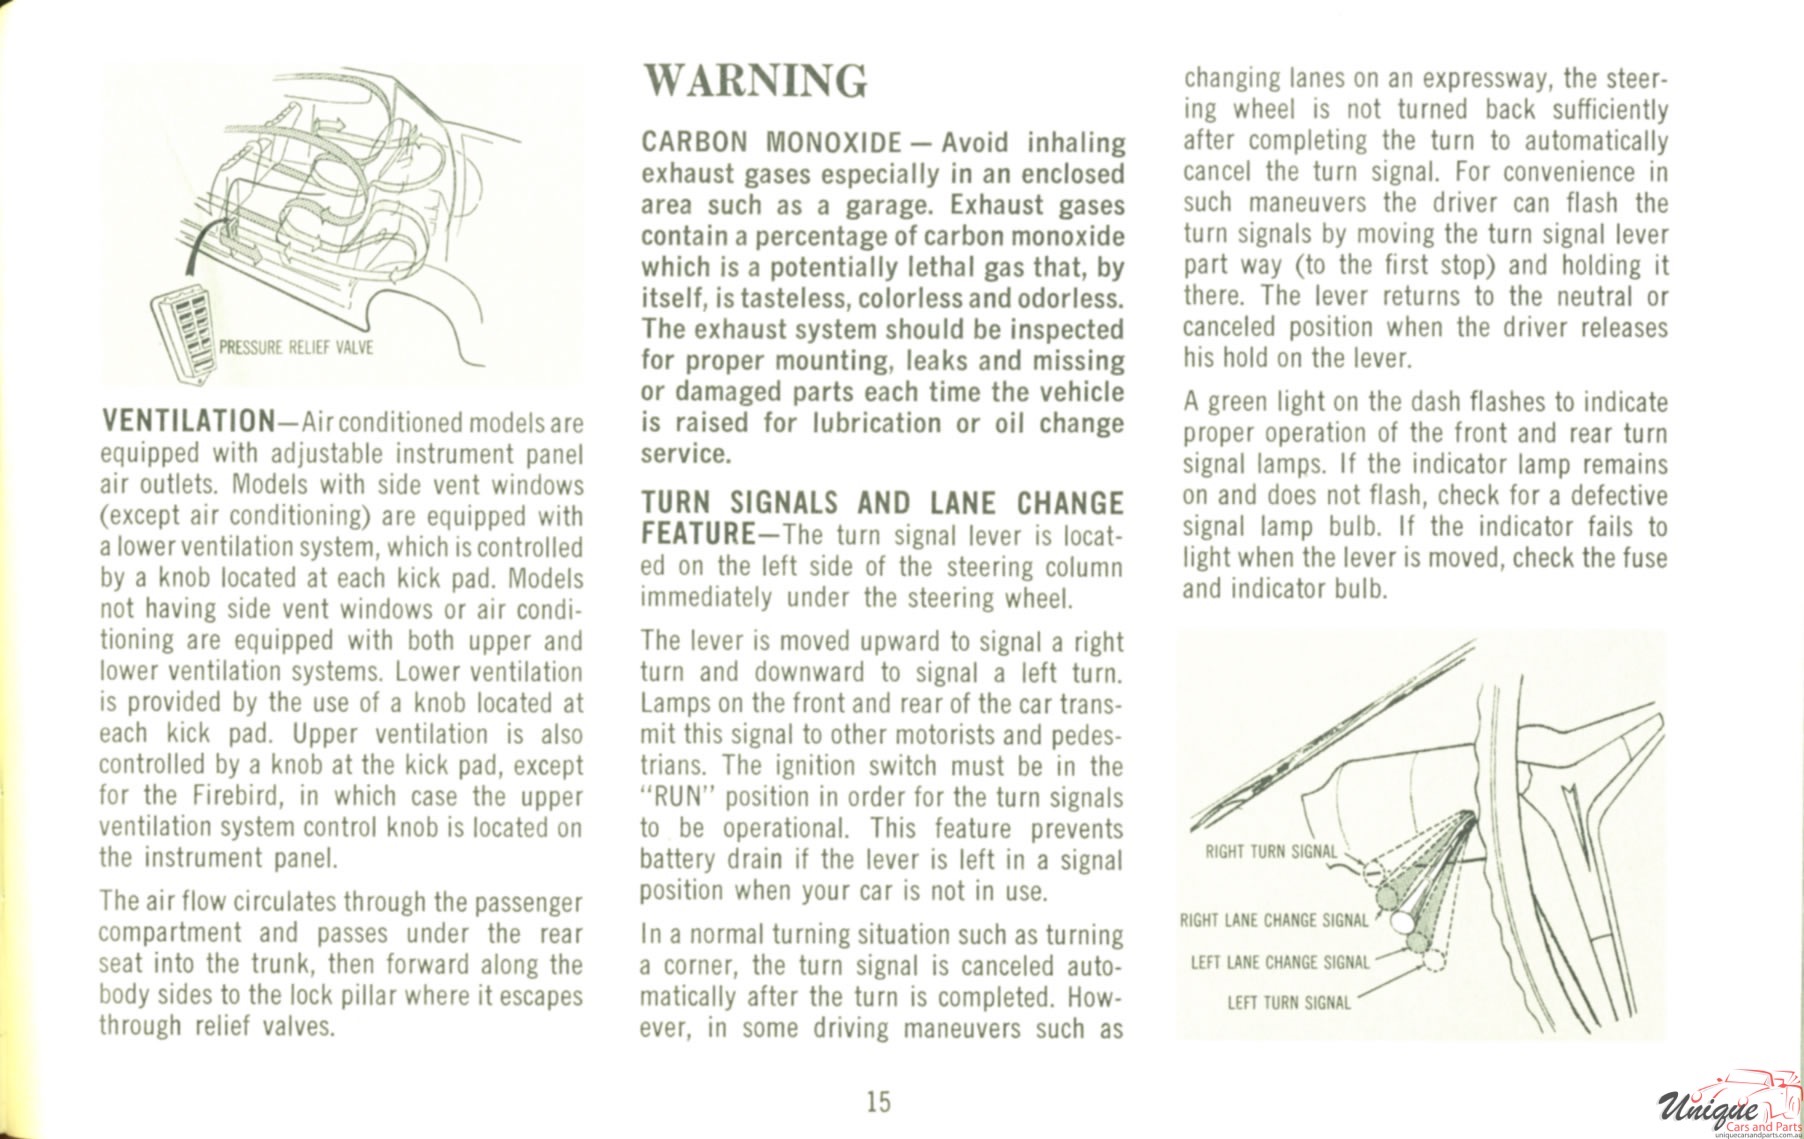 1969 Pontiac Owners Manual Page 22